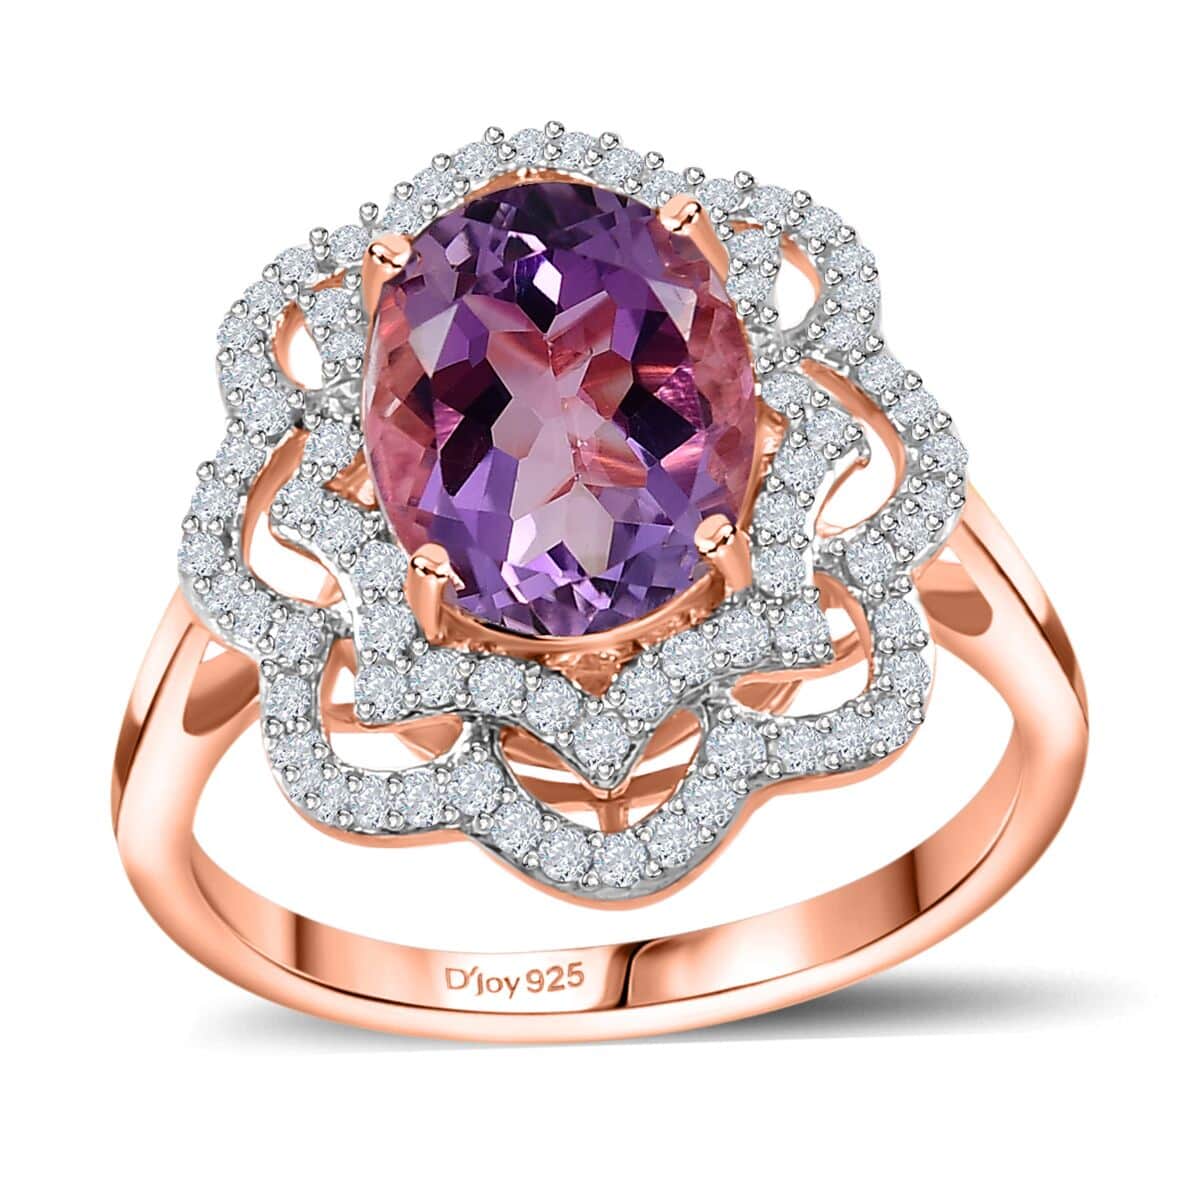 Browse the Rose De France Amethyst Jewelry Collection